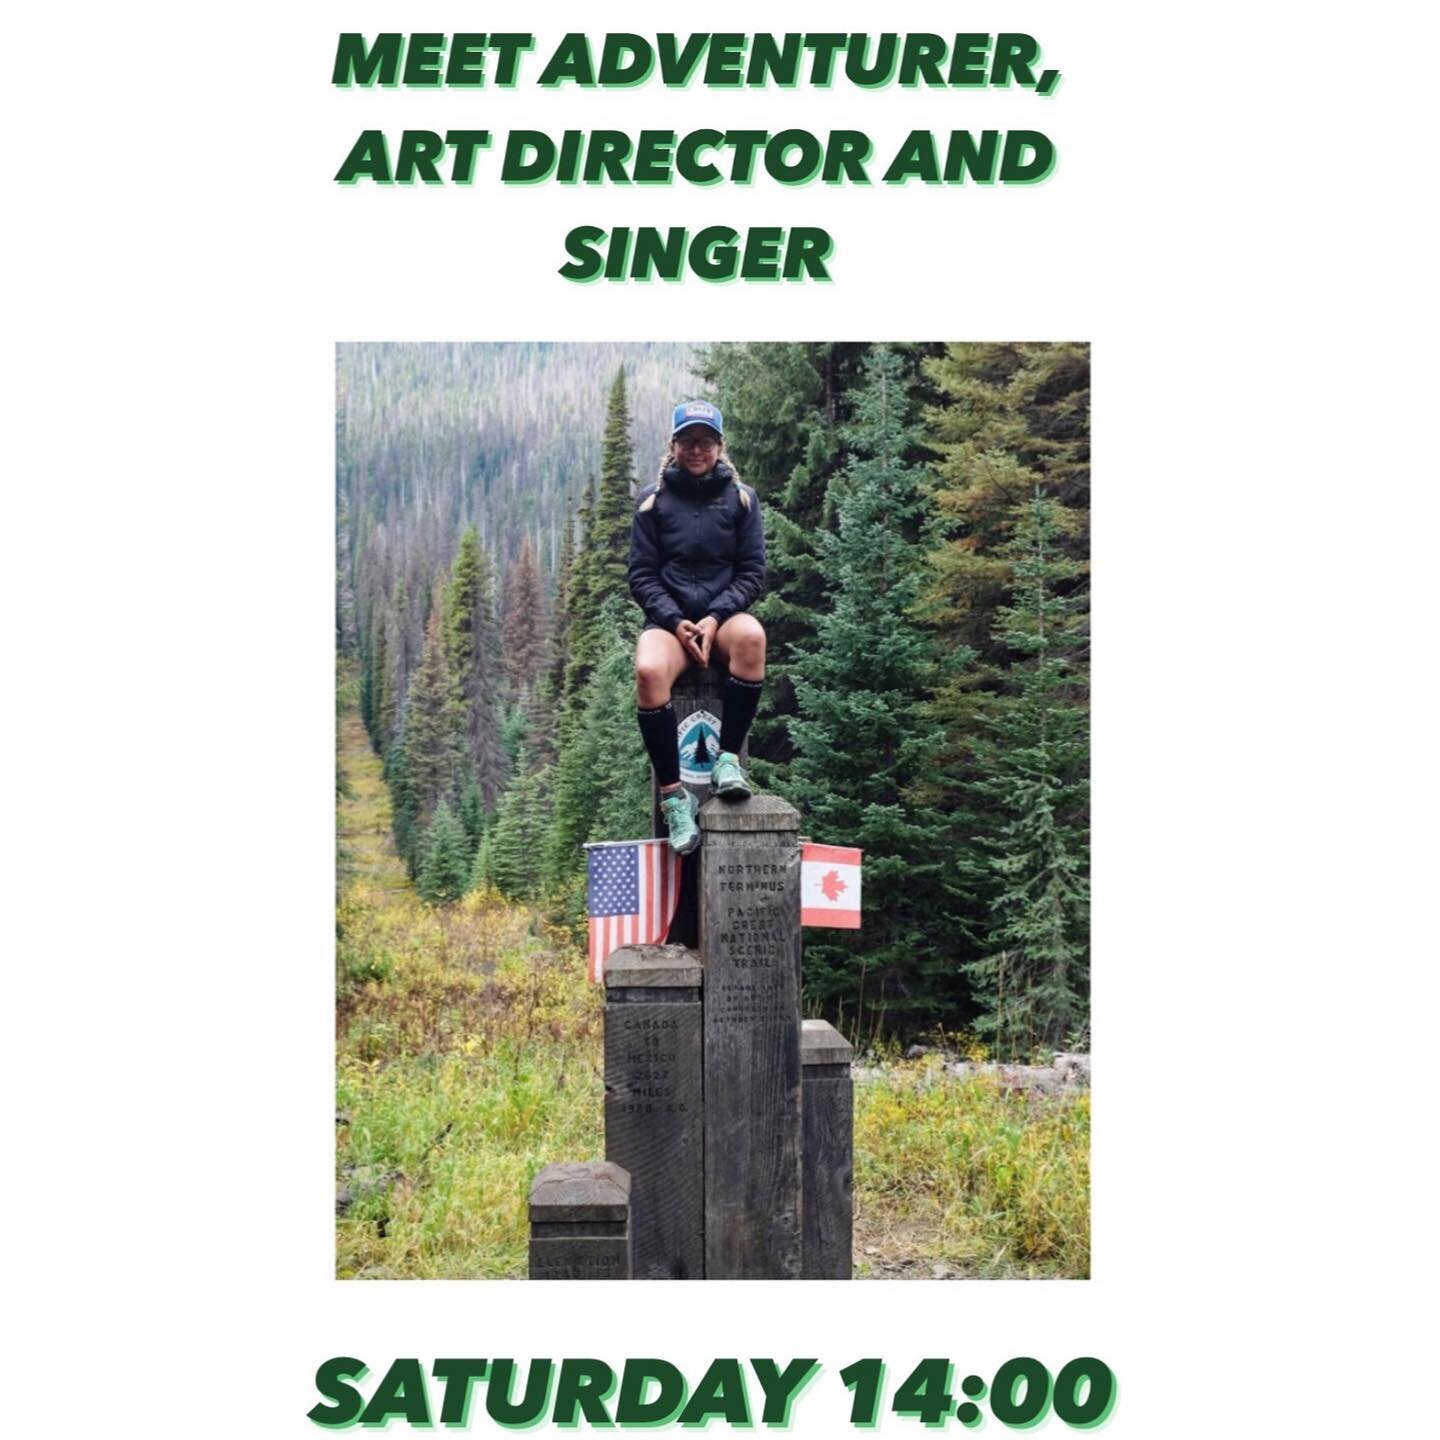 Meet @thewalkingdom 🌲🎒💃🏼
Saturday 14:00 at the garden talks💚
Reserve your place💻
Link in bio